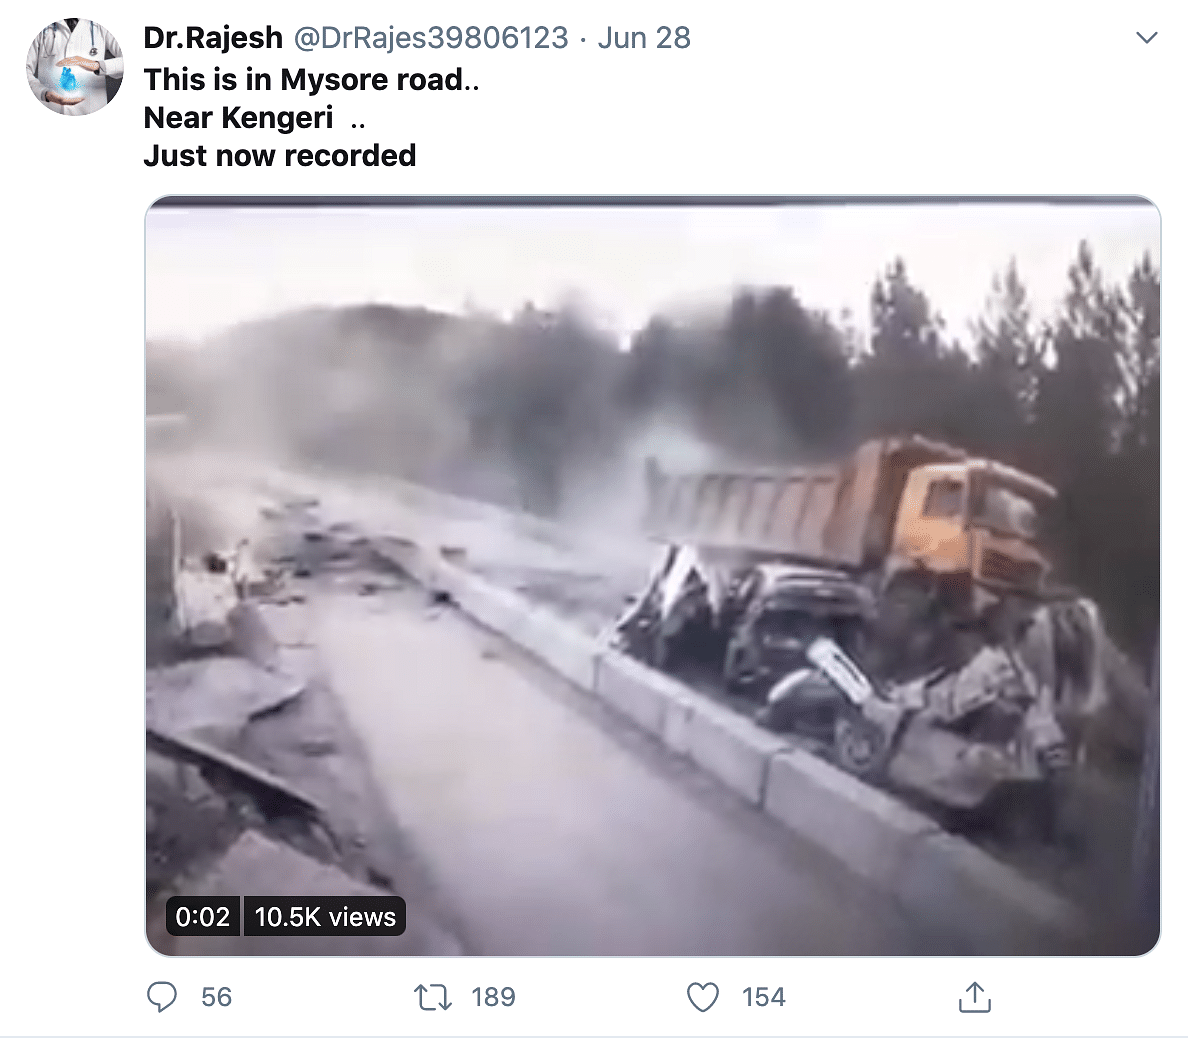 The truck accident happened in Russia’s Chelyabinsk and is now being shared in India as an accident in Mysore.